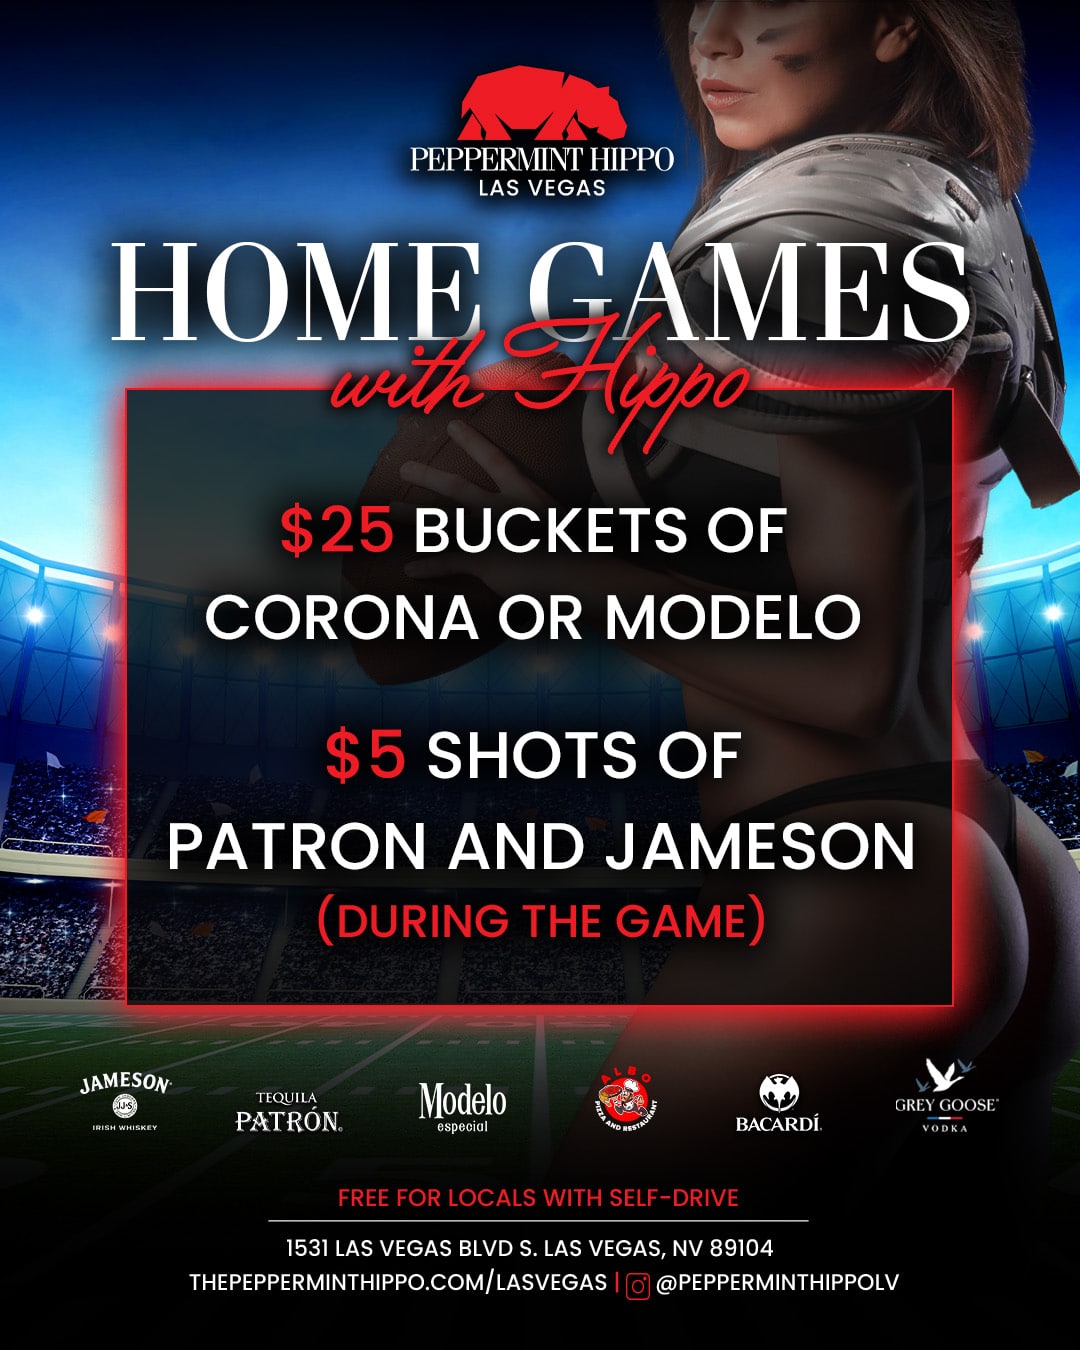 Home Games Football Specials at Peppermint Hippo Las Vegas